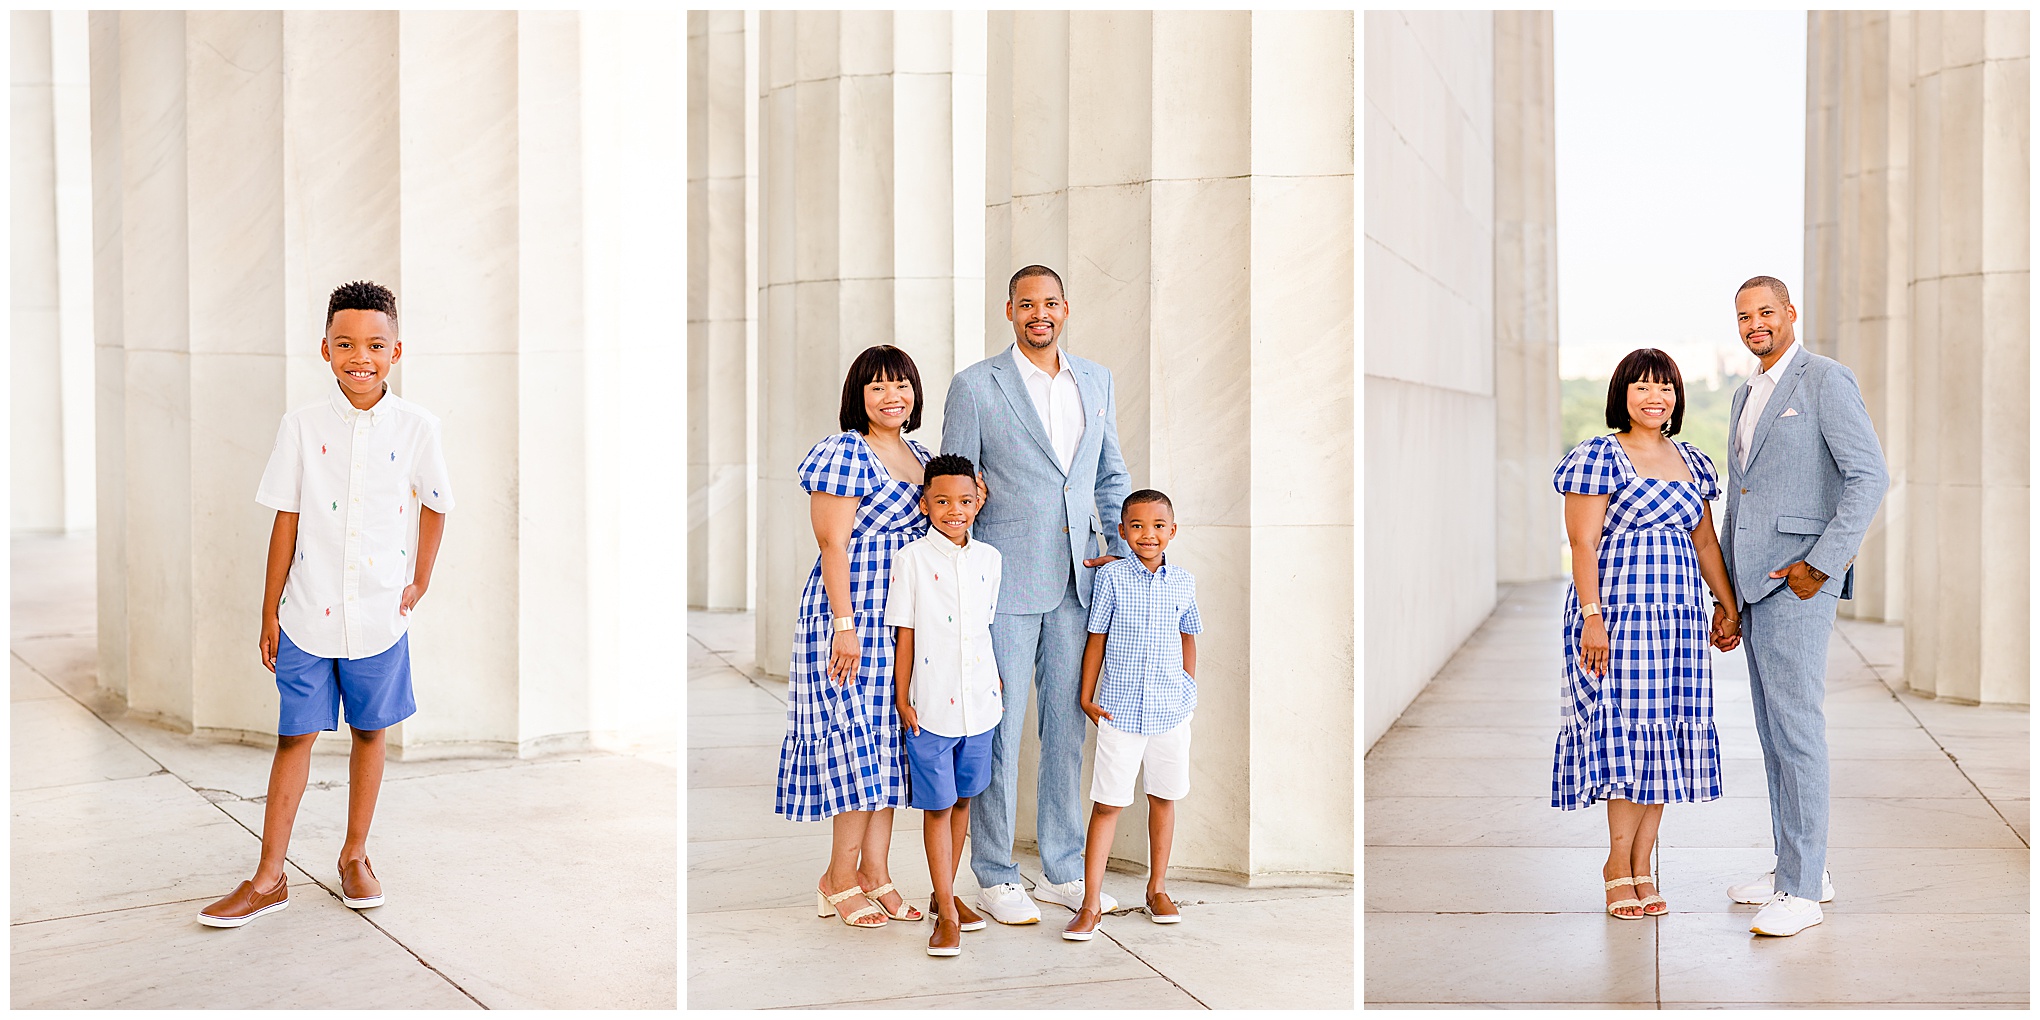 summer Lincoln Memorial family photos, Lincoln Memorial portraits, DC family photos, National Mall family photos, summer of four, family portrait poses, Lincoln Memorial portraits, DC family photographer, Rachel E.H. Photography, boy with hand in pocket, family in front of pillar